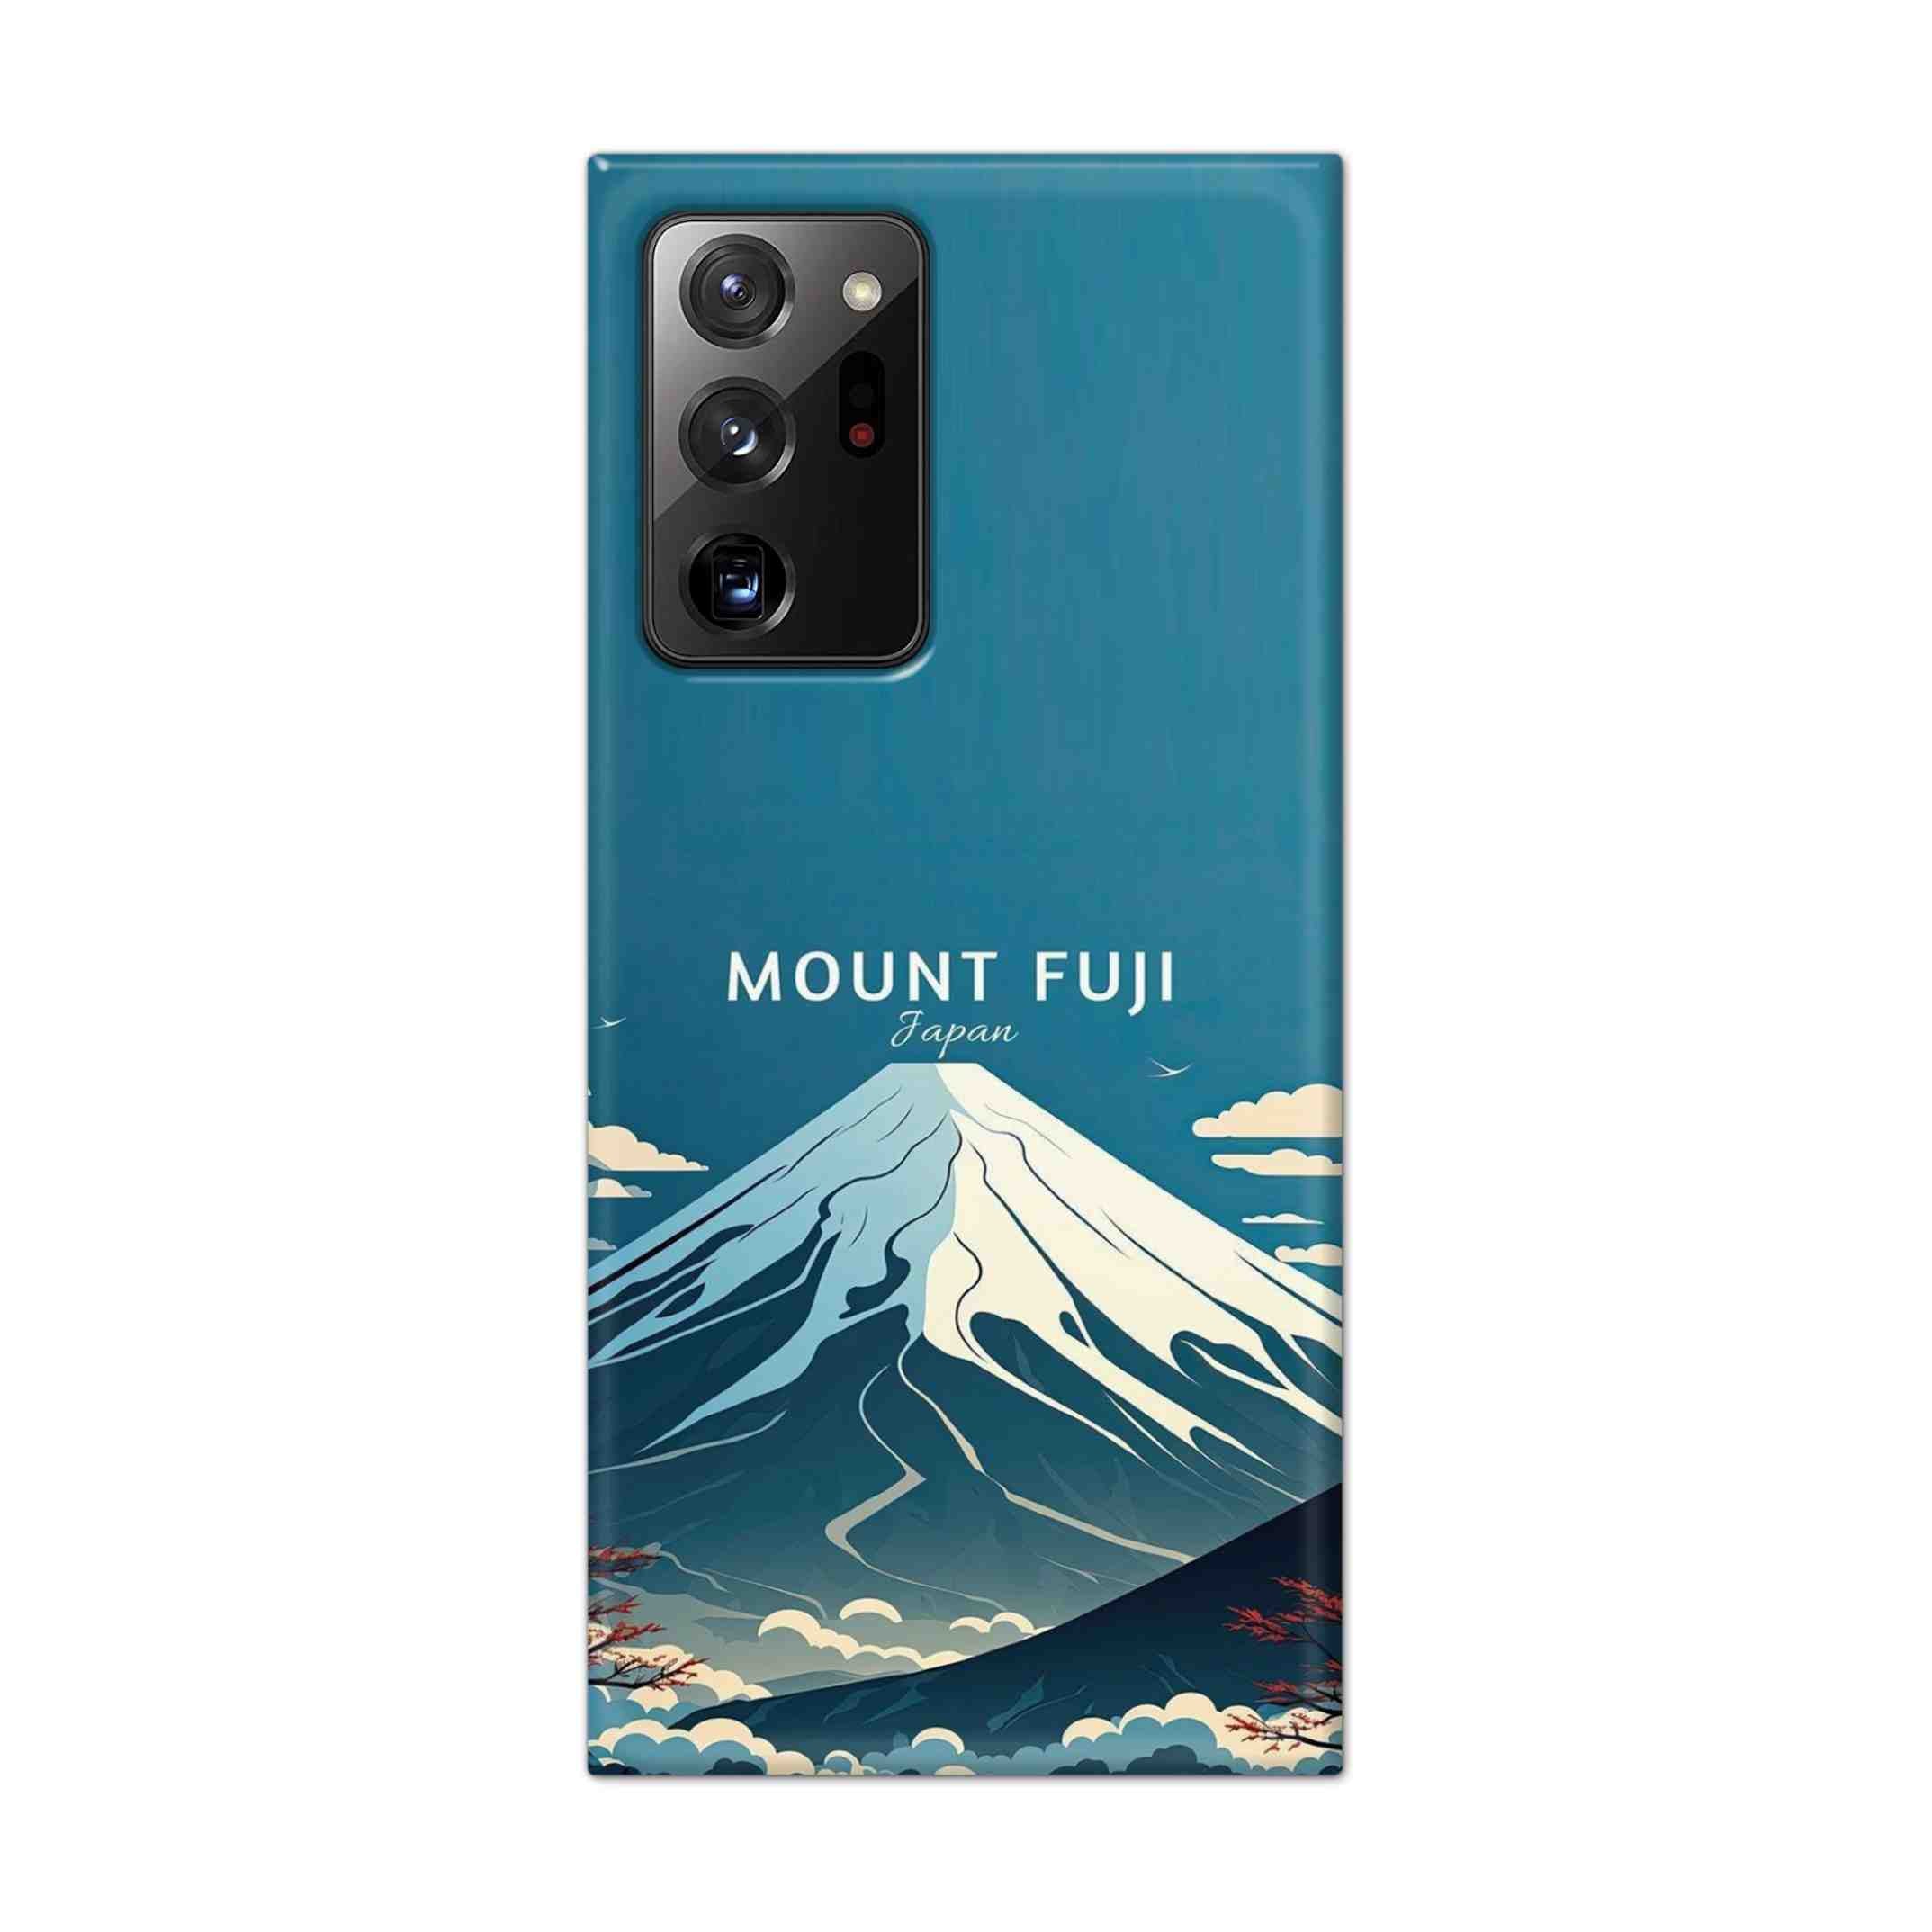 Buy Mount Fuji Hard Back Mobile Phone Case Cover For Samsung Galaxy Note 20 Ultra Online